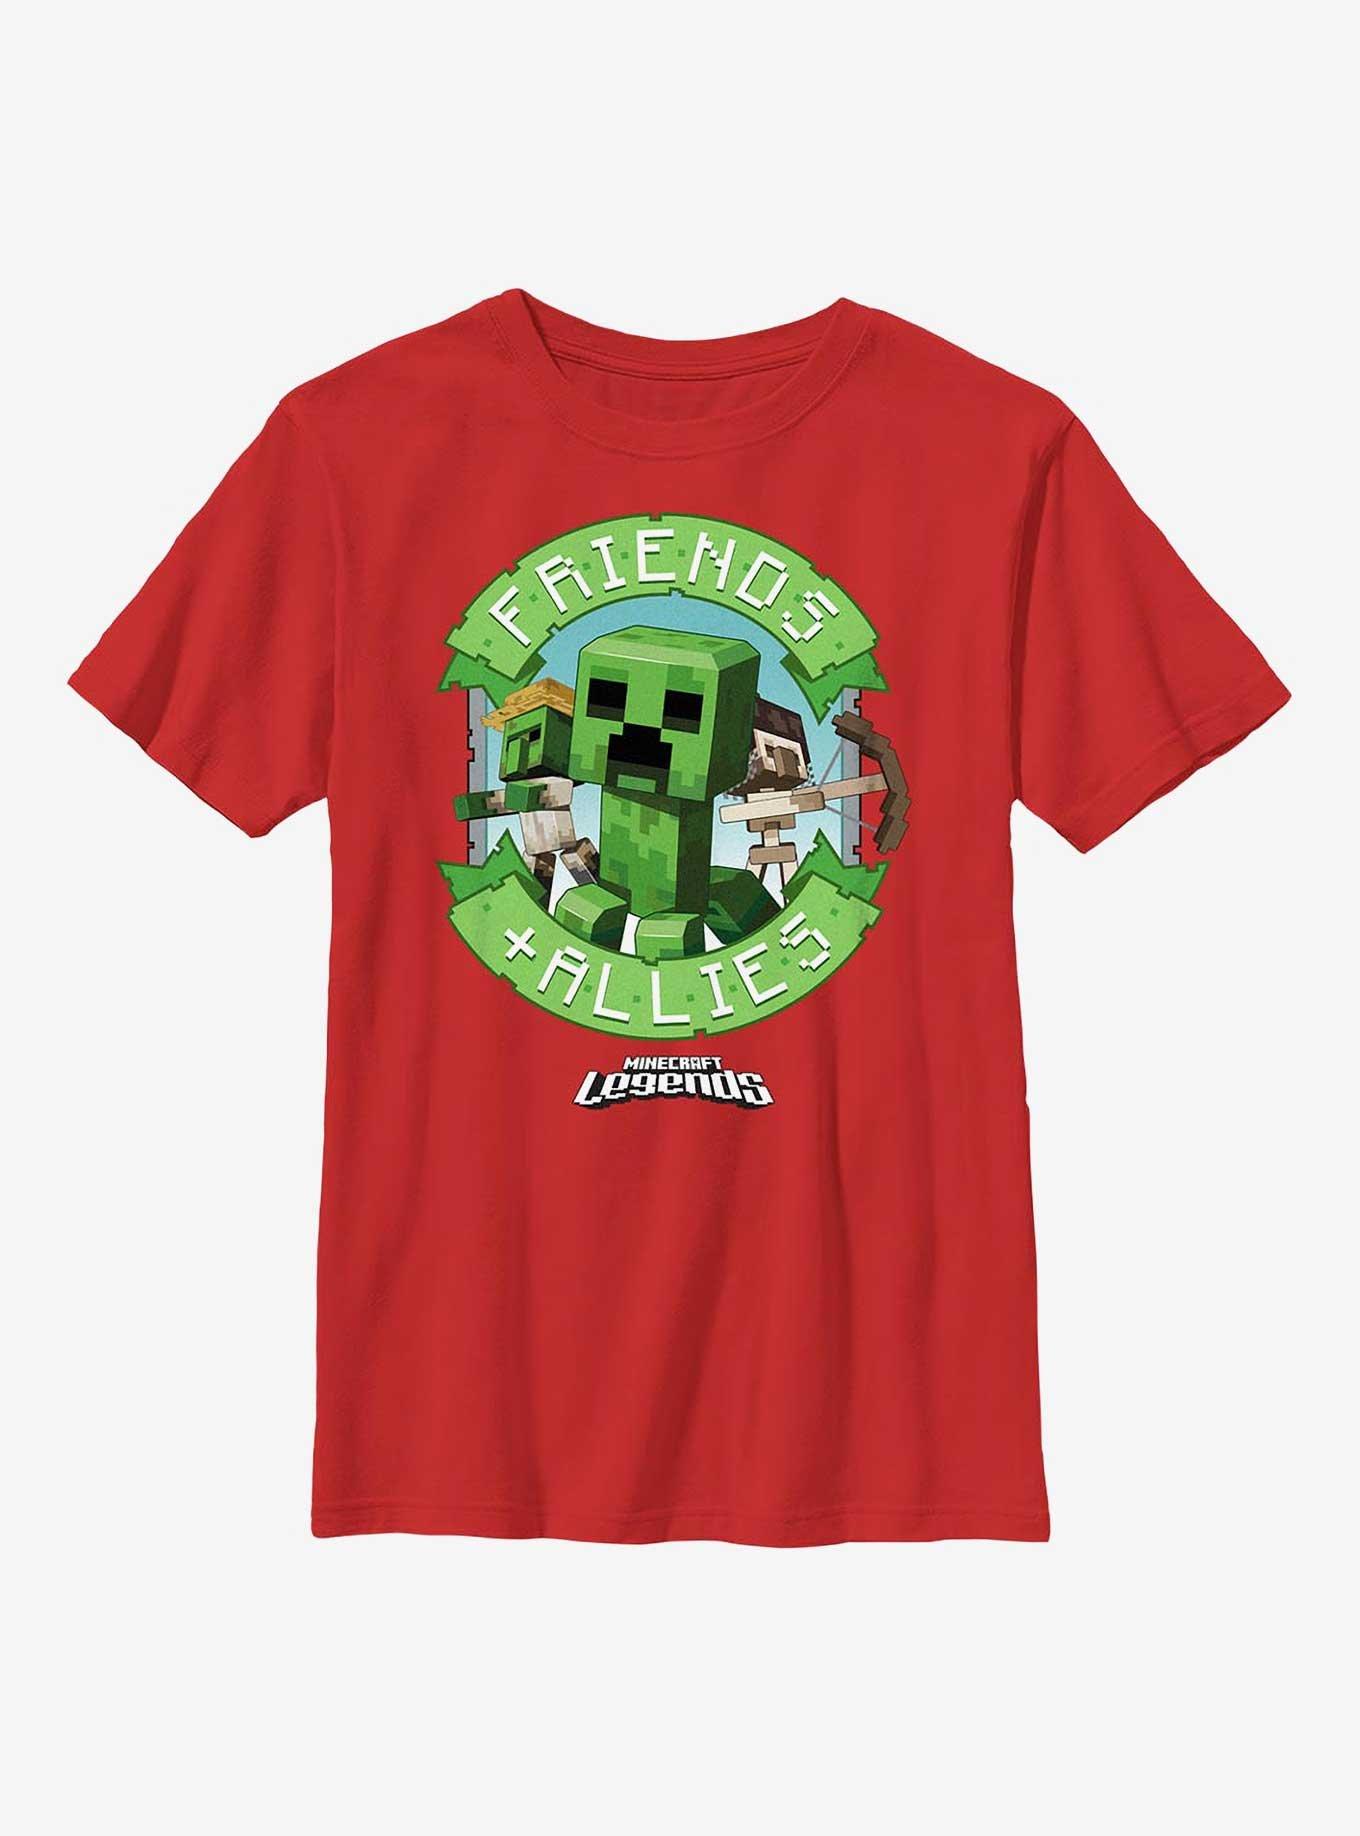 Minecraft Legends Friends & Allies Badge Youth T-Shirt, RED, hi-res